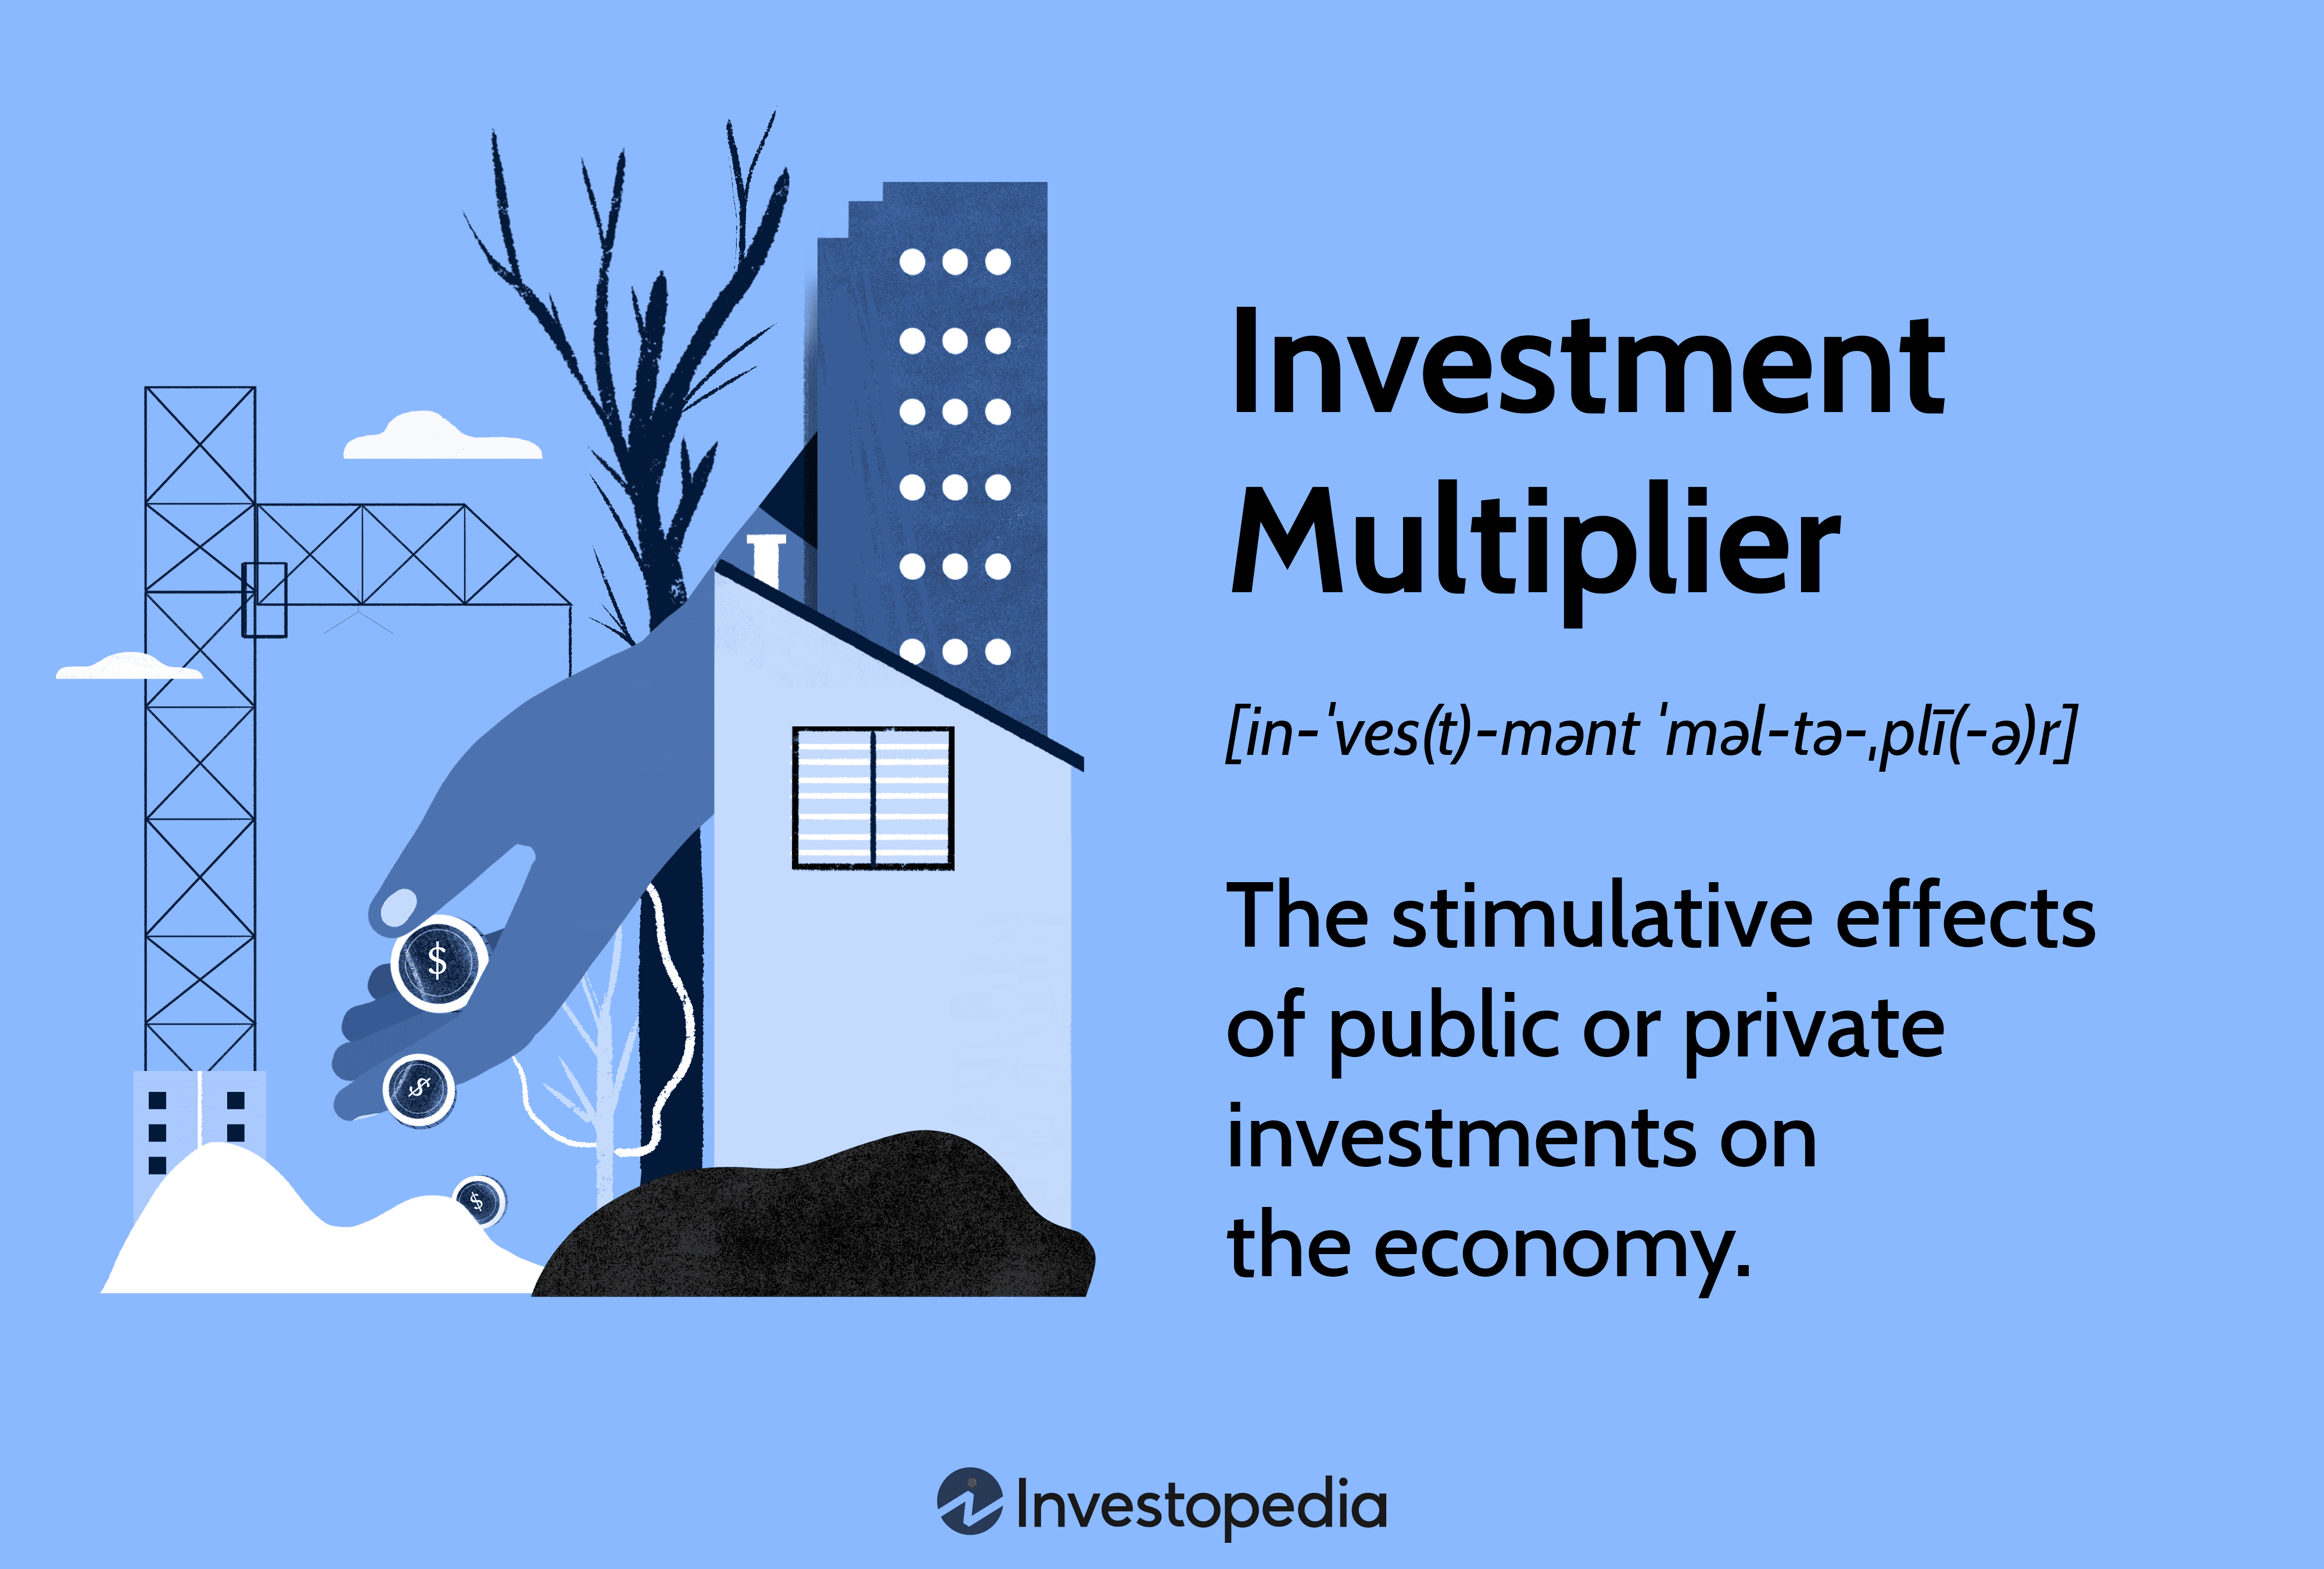 Investment Multiplier: The stimulative effects of public or private investments on the economy.